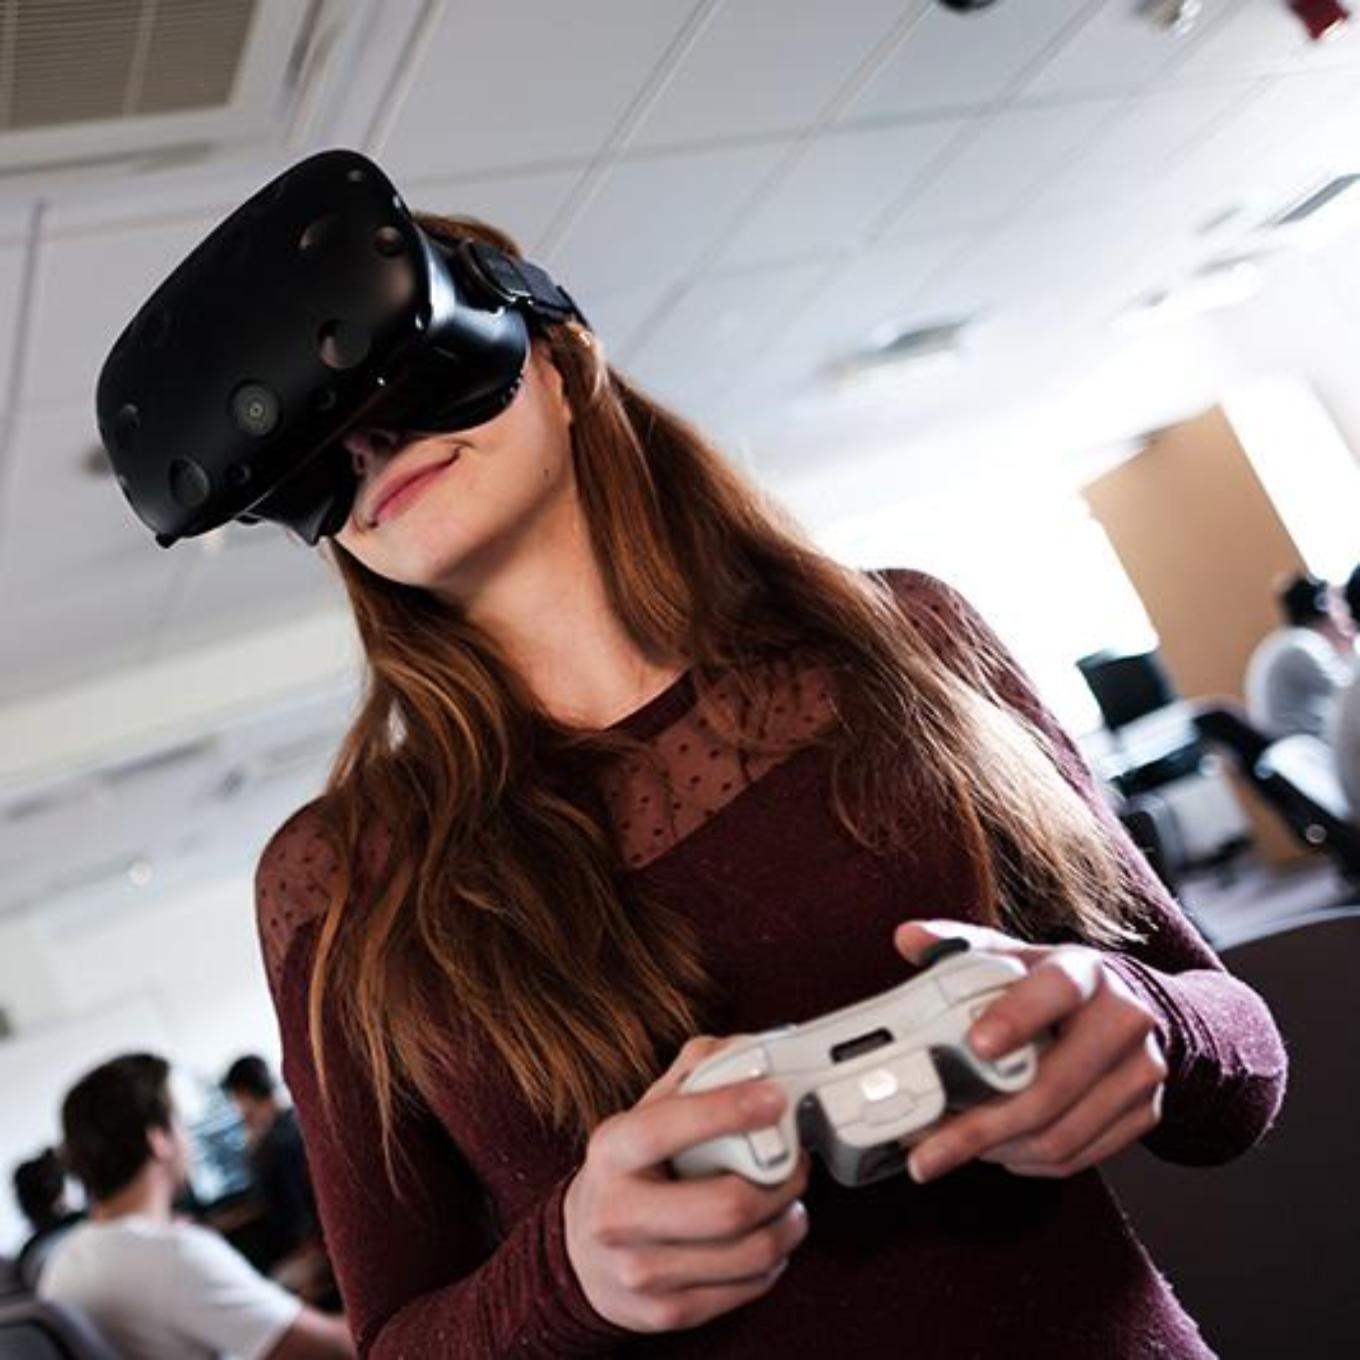 A student using a VR game